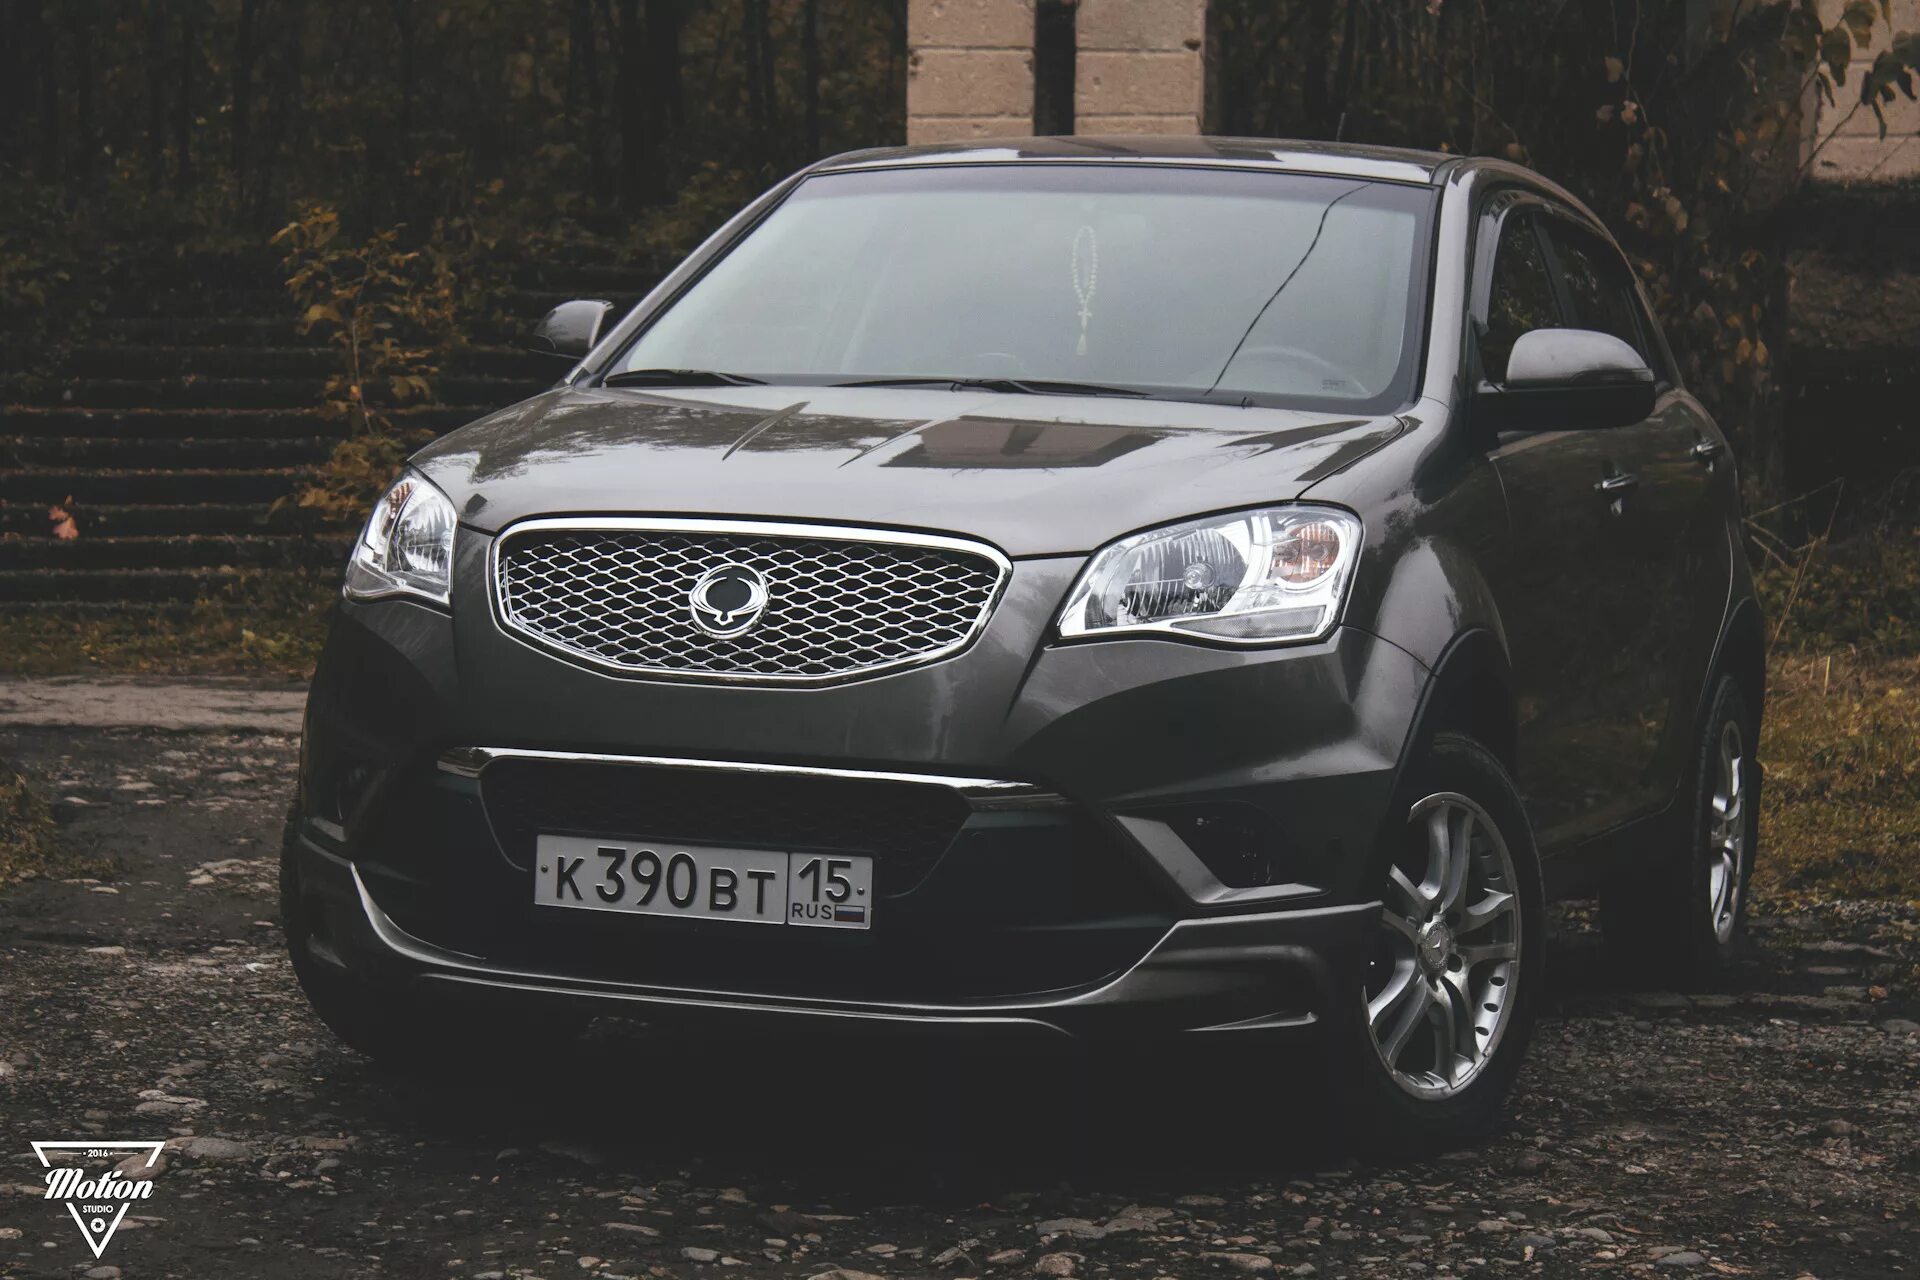 Санг енг нев. SSANGYONG New Actyon. SSANGYONG Actyon New 2. ССАНГЙОНГ Актион Нью 2012. Санг енг Актион Нью (кроссовер) 2012 года.